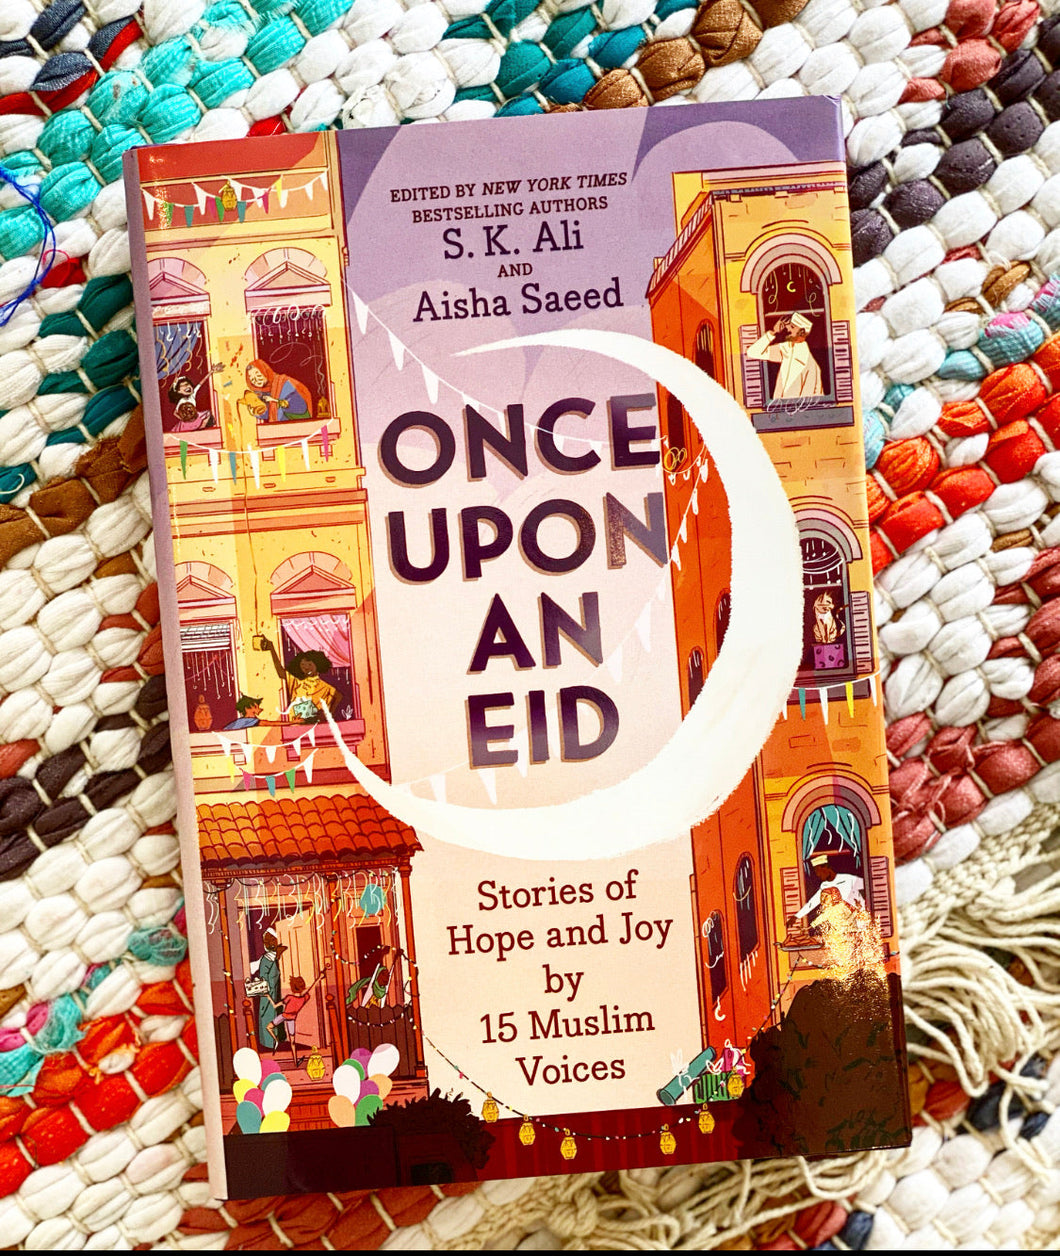 Once Upon an Eid: Stories of Hope and Joy by 15 Muslim Voices [paperback] | S. K. Ali + Aisha Saeed